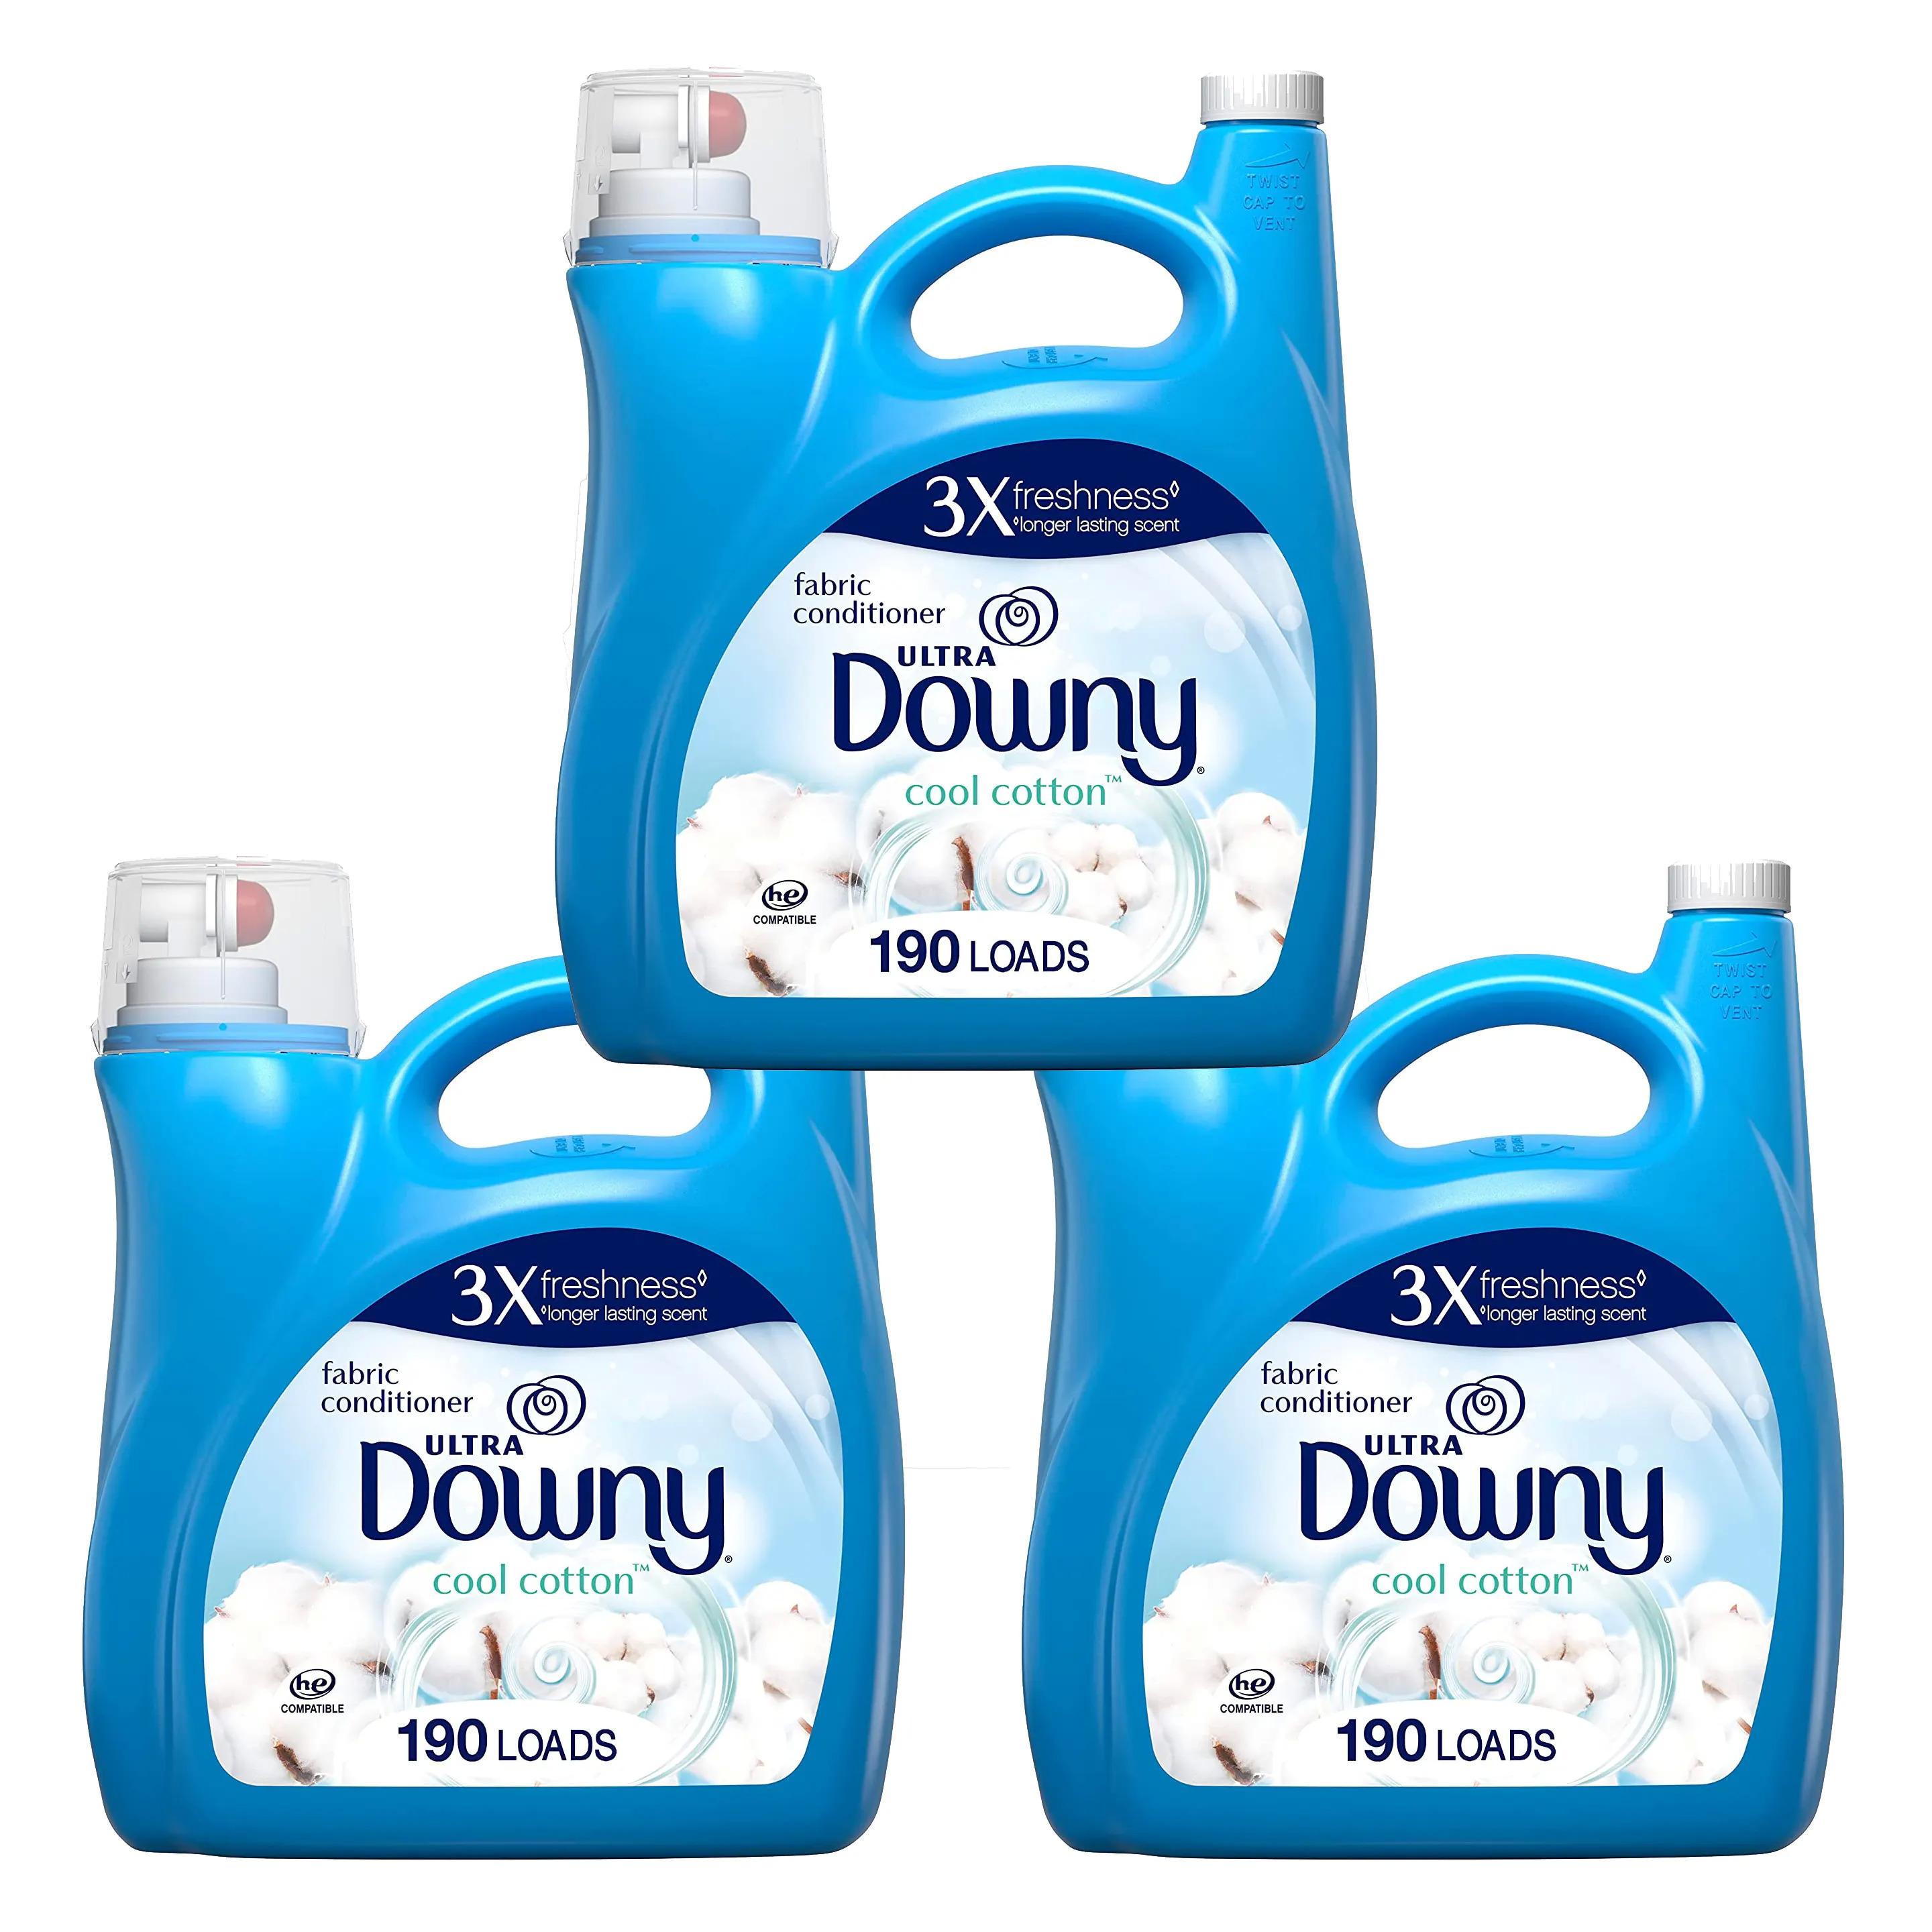 Downy Liquid Fabric Softener 3 Pack for $28.91 Shipped